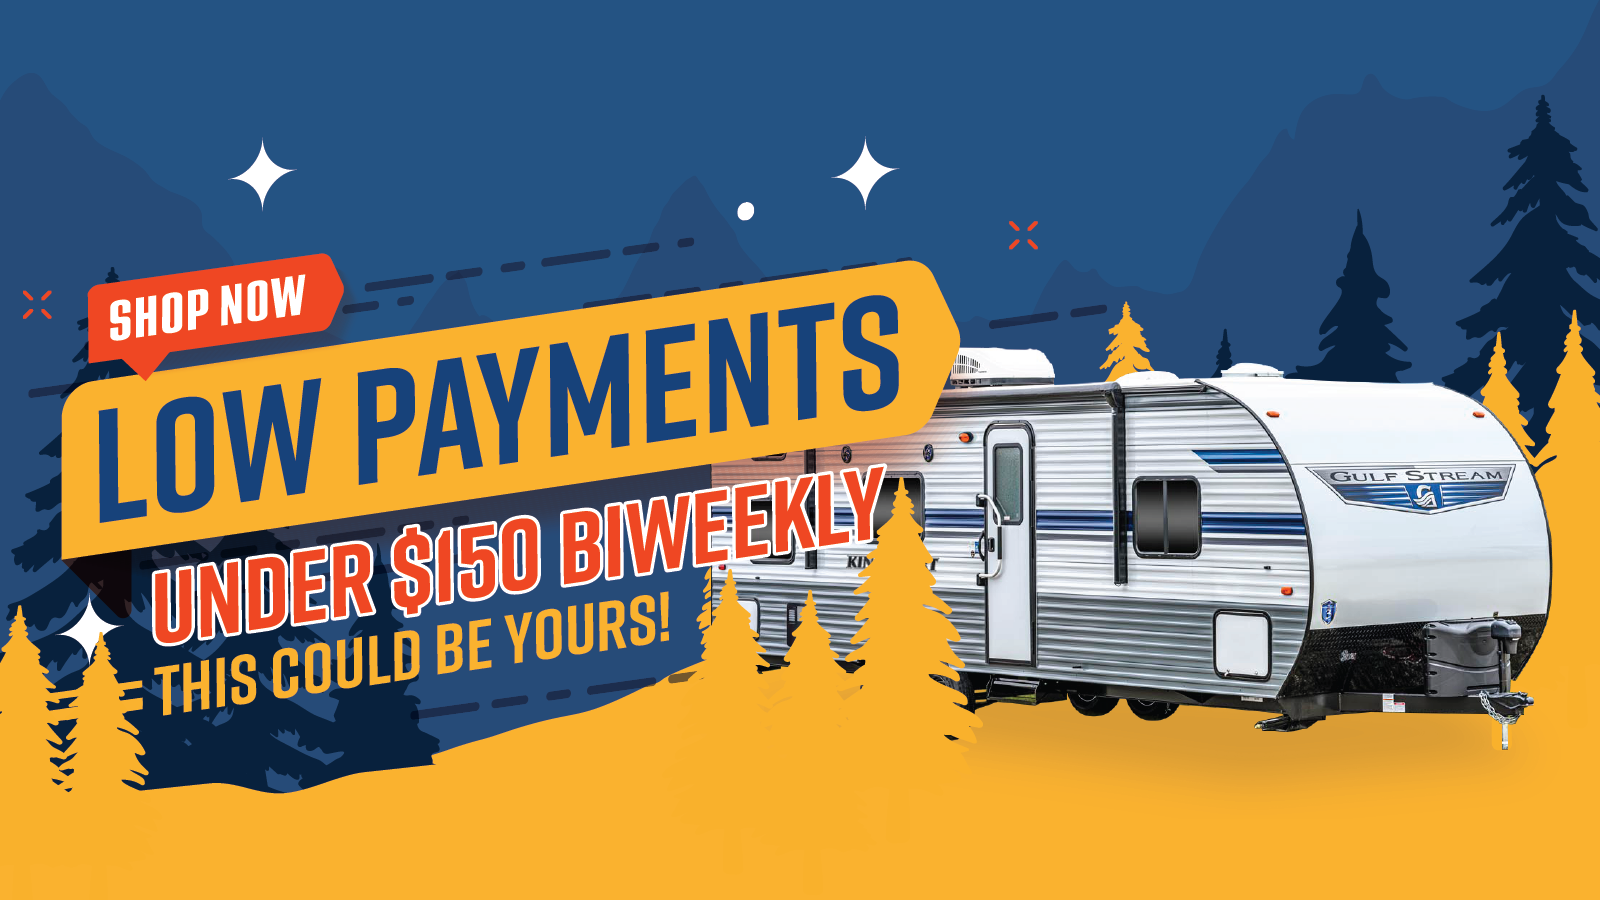 Oceanside RV Graphic Low payments under 150$ biweekly this could be wrong with an RV and blue and yellow photo forest background